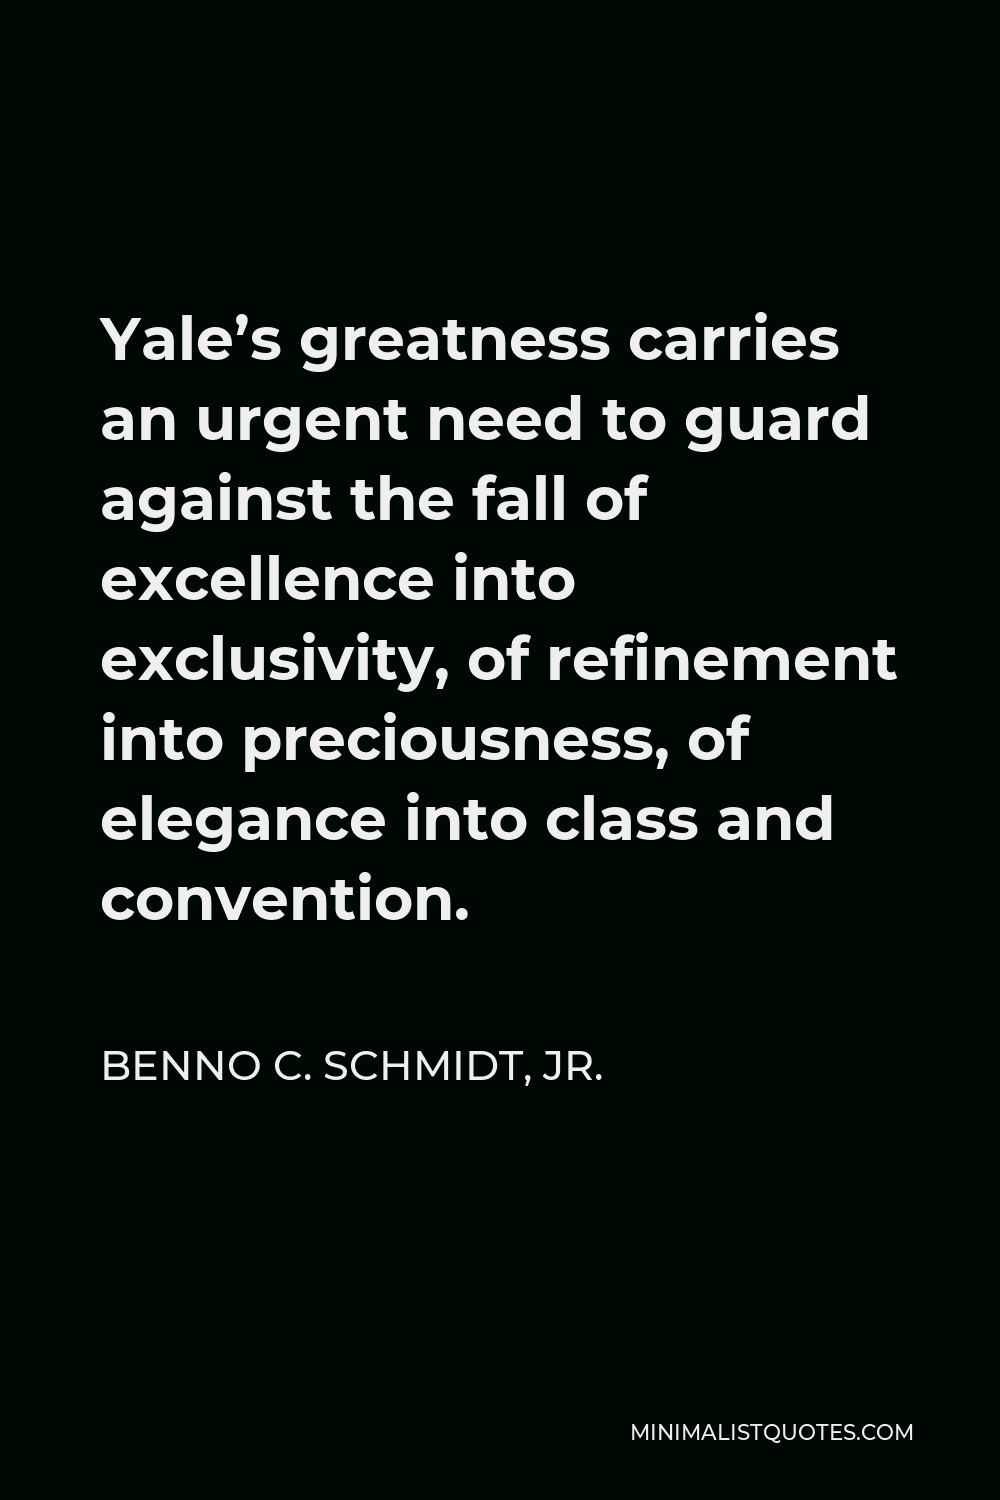 Benno C. Schmidt, Jr. Quote - Yale’s greatness carries an urgent need to guard against the fall of excellence into exclusivity, of refinement into preciousness, of elegance into class and convention.